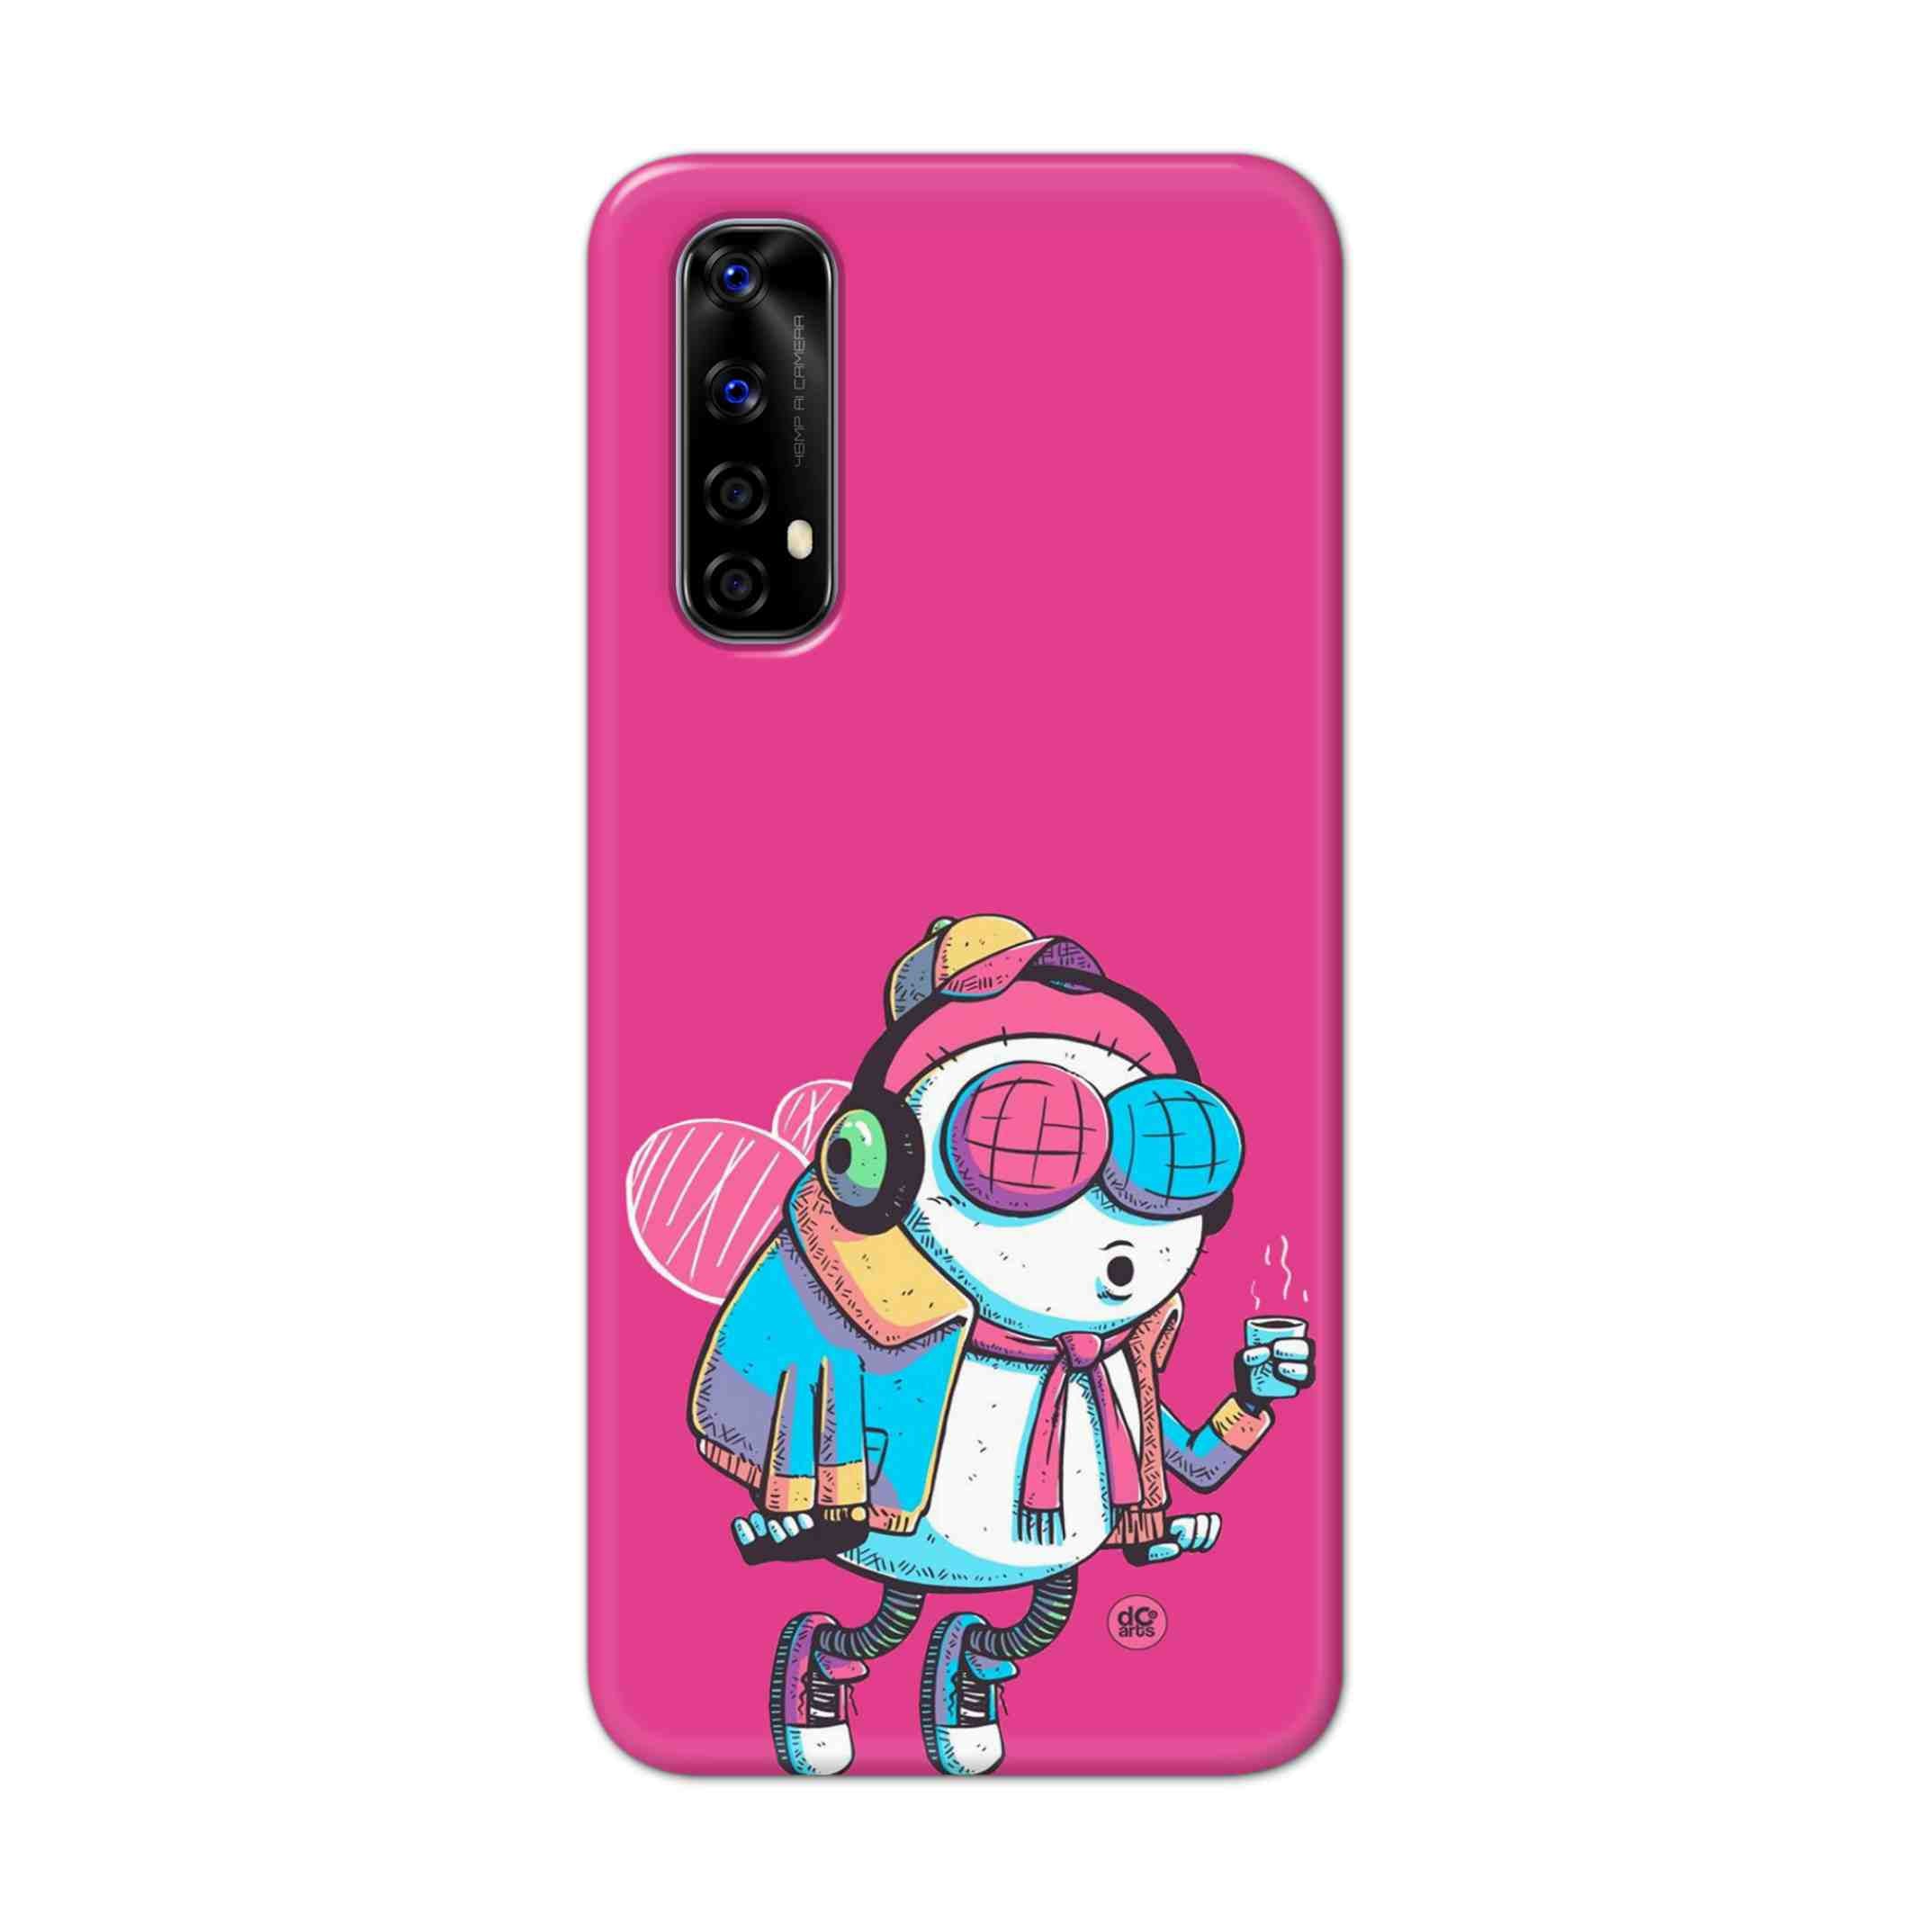 Buy Sky Fly Hard Back Mobile Phone Case Cover For Realme Narzo 20 Pro Online